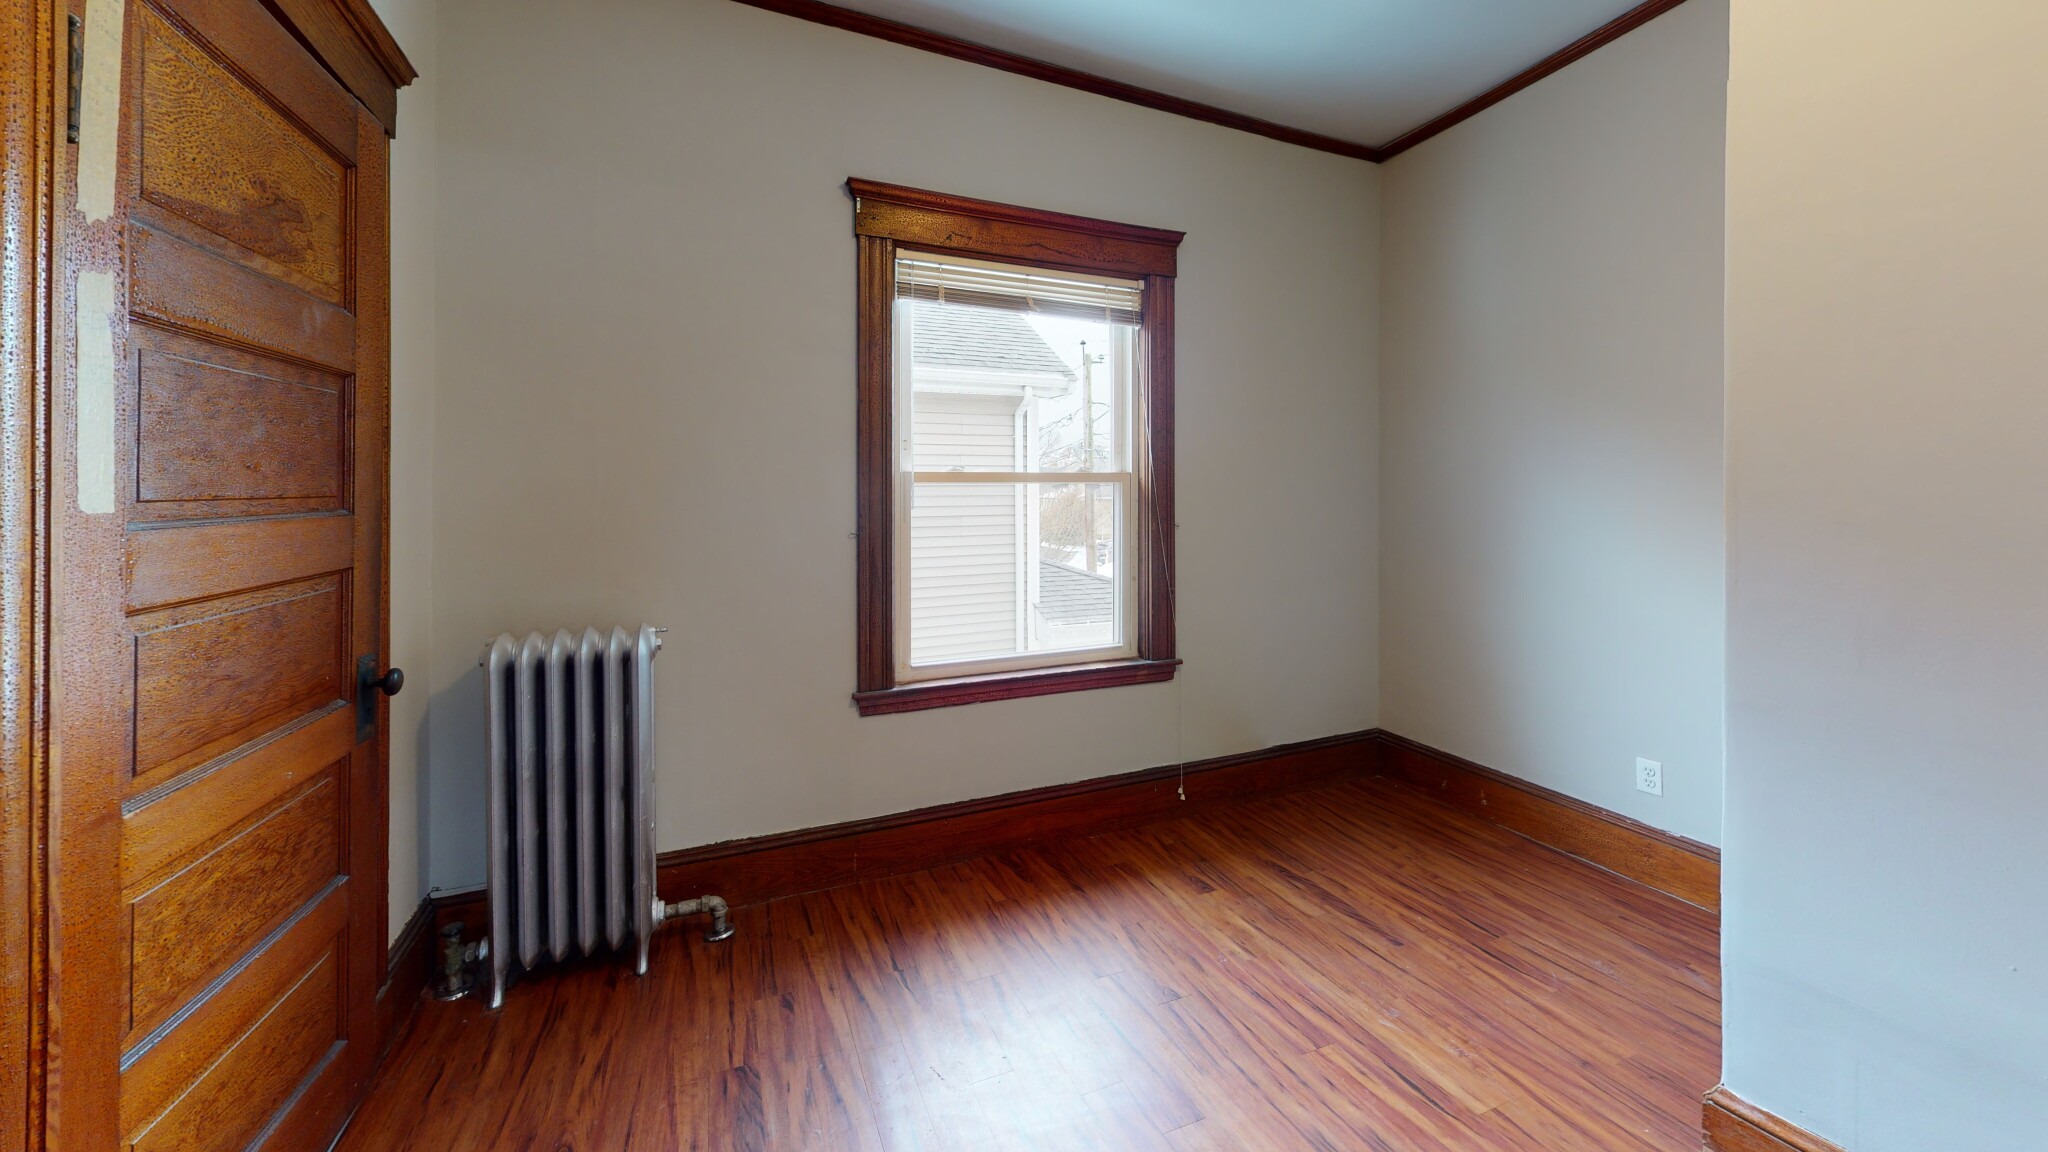 Photos of apartment on Edenfield Ave.,Watertown MA 02472